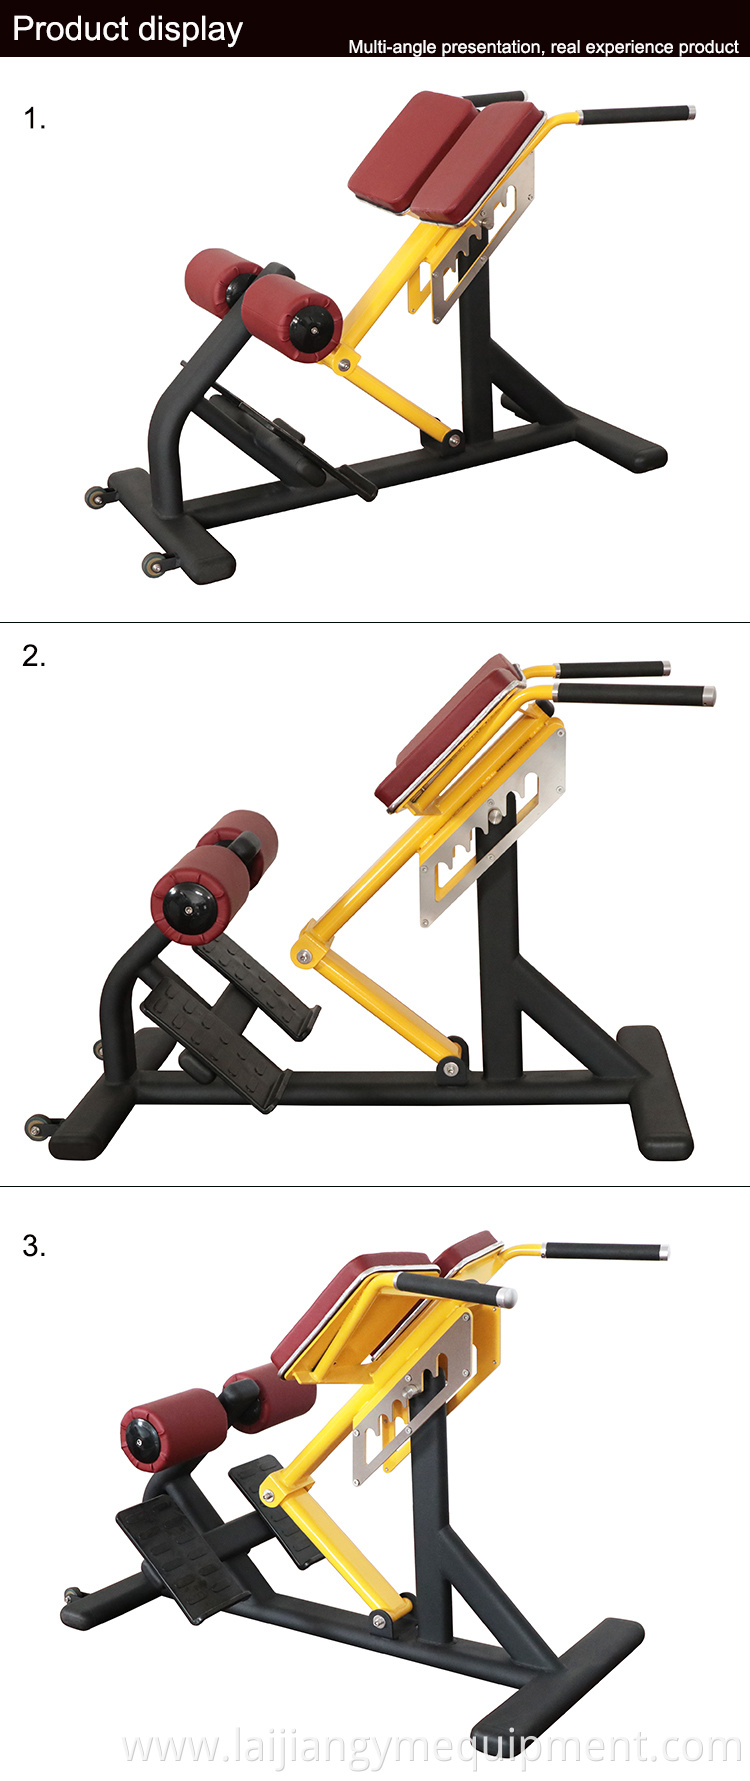 Gym Commercial fitness equipment bodybuilding back adjustable Bodybuilding sit up Roman chair